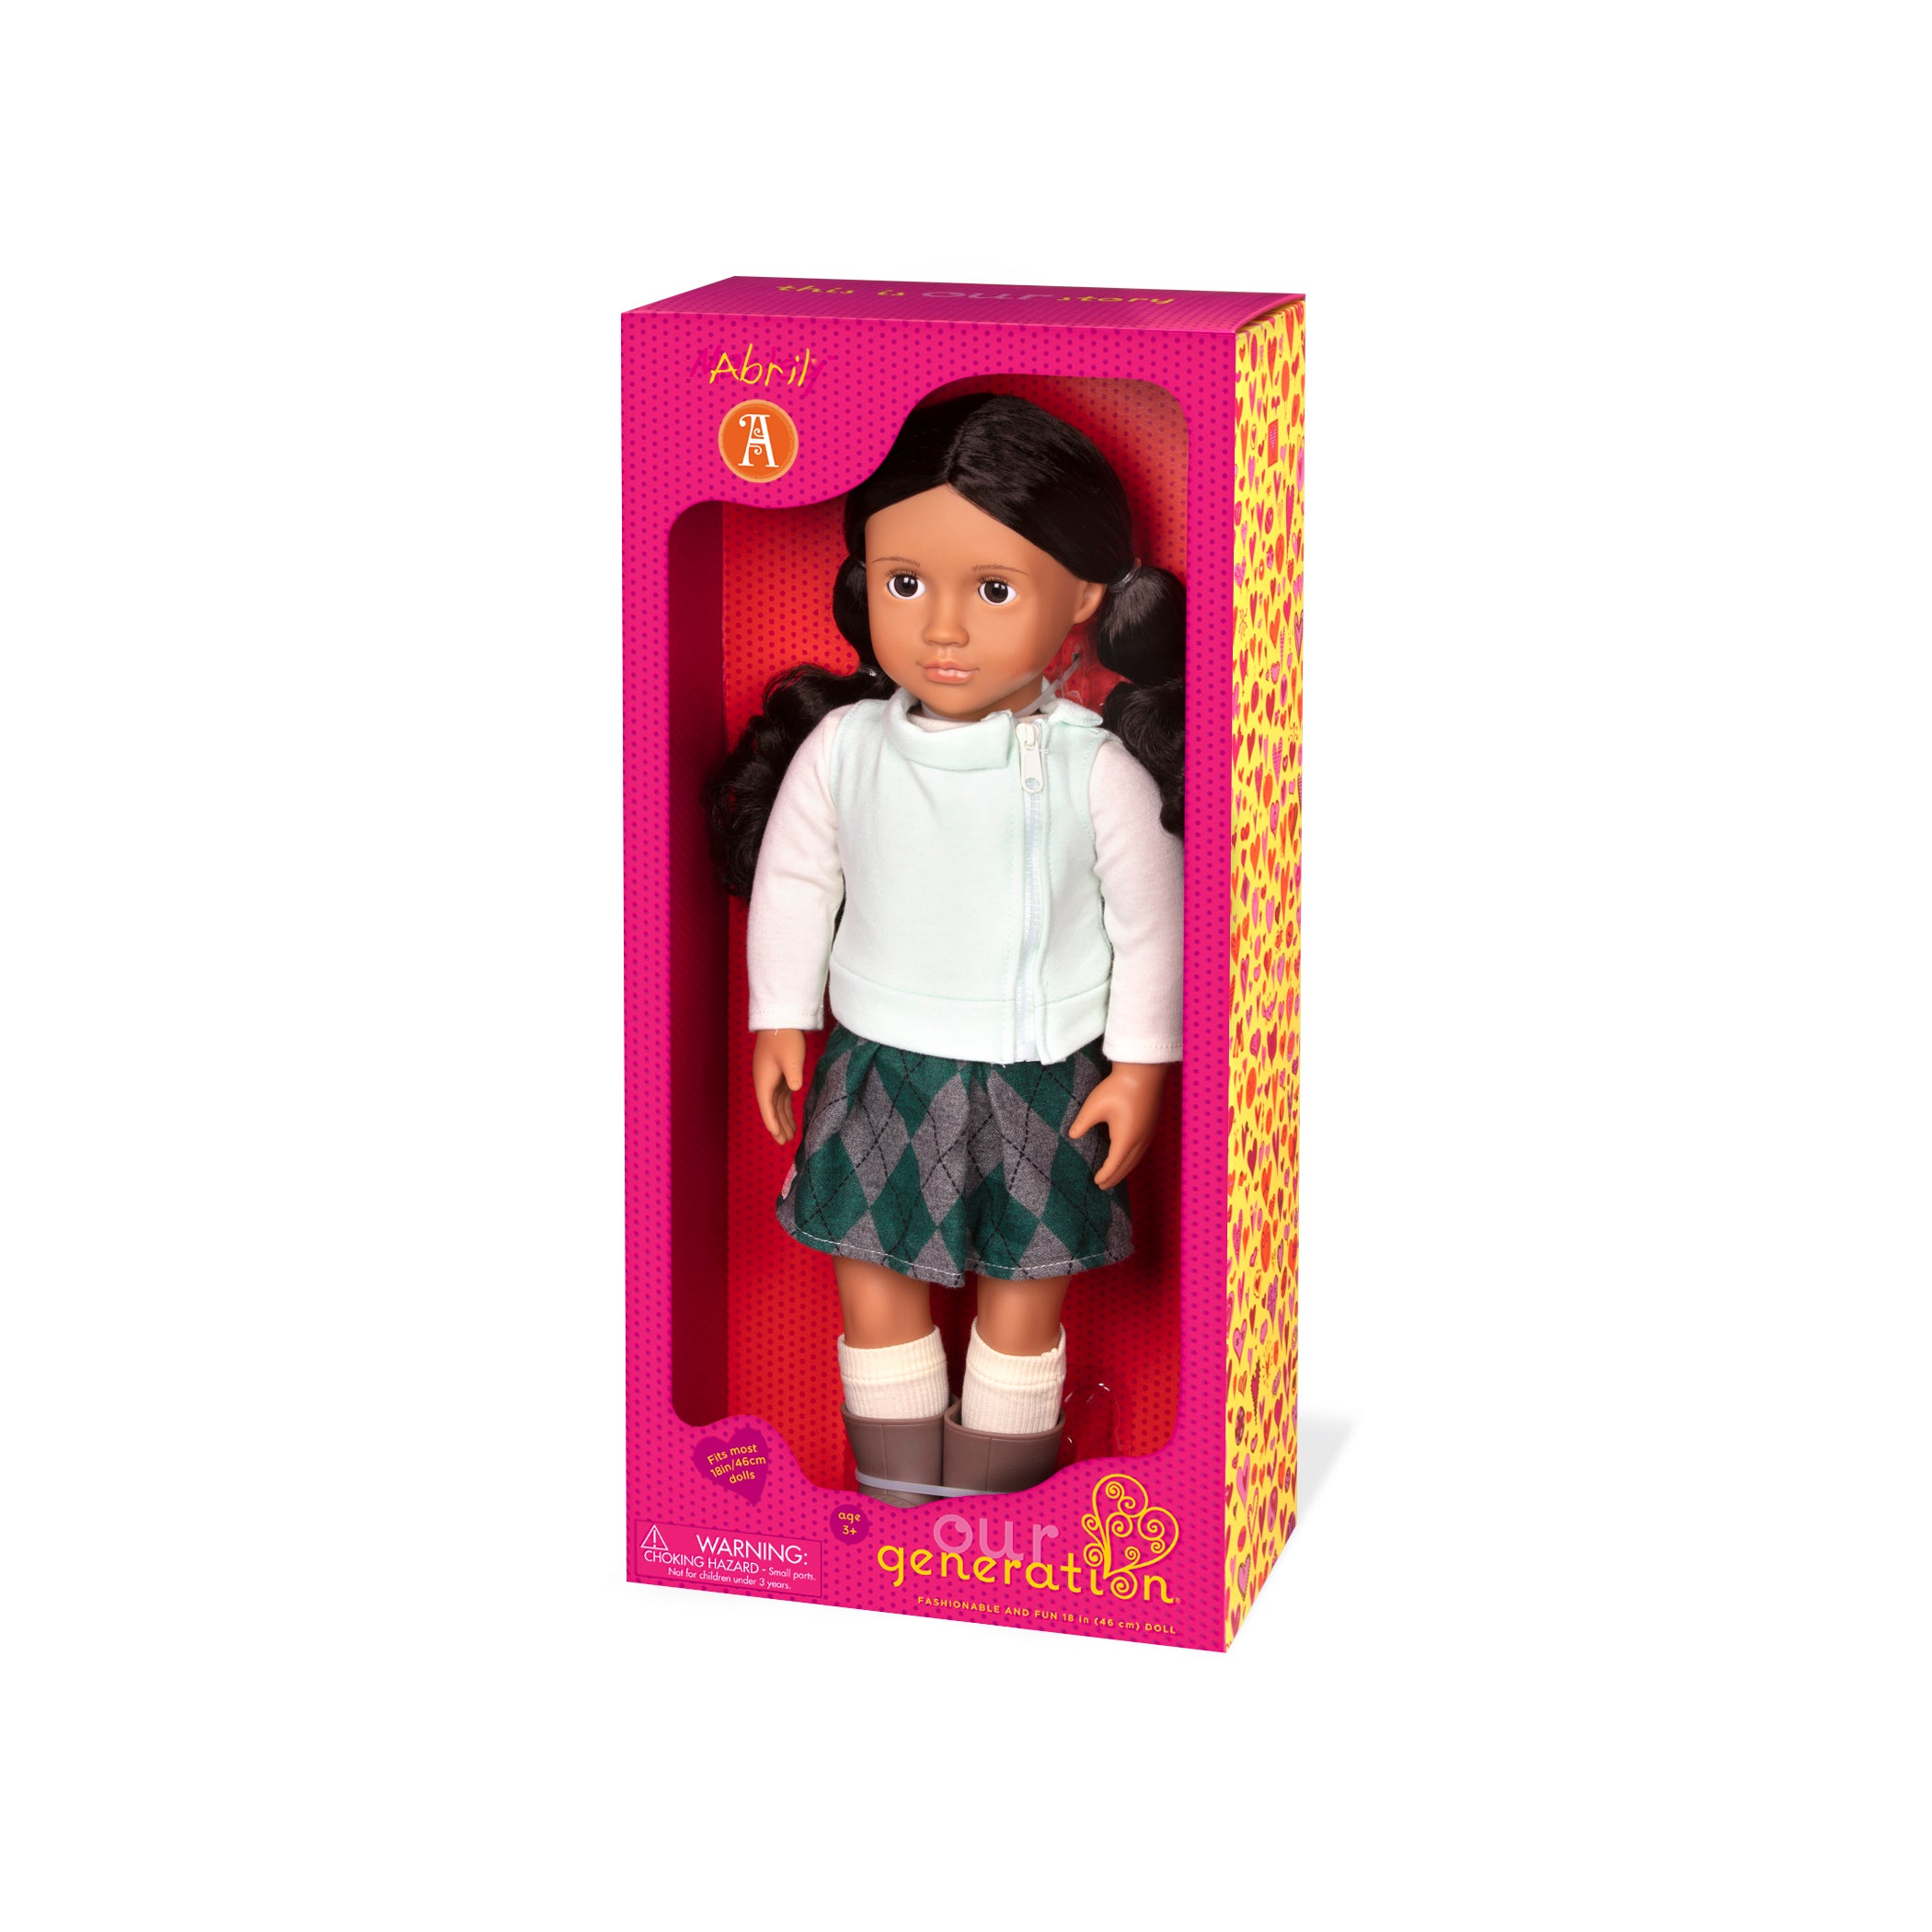 Unsere Generation: Abril Doll 46 cm